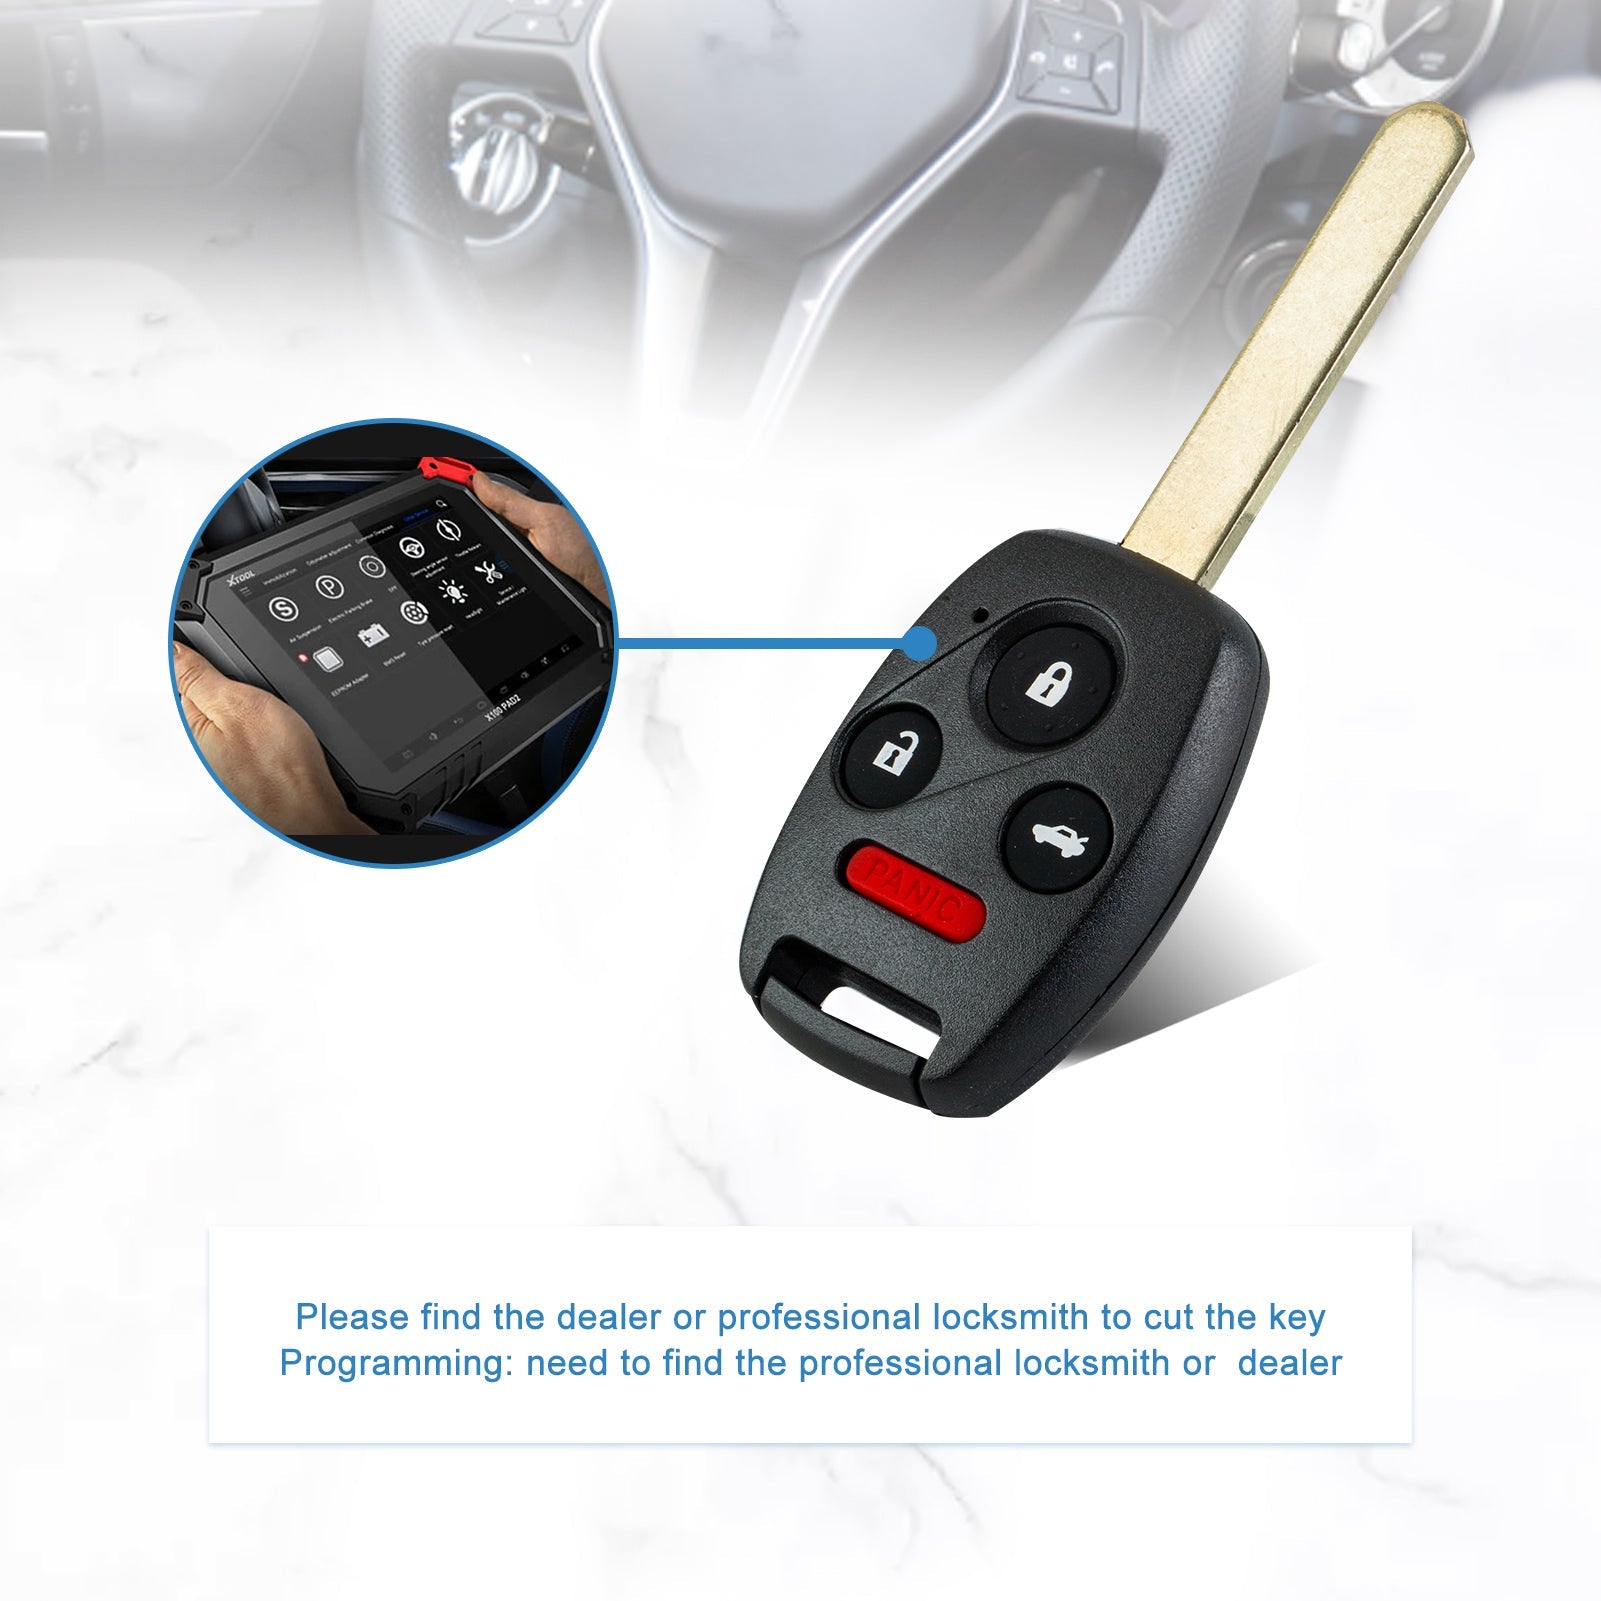 Button Car Remote Control Keyless Entry Remote 313.8MHZ Replacement for 2006-2011 Civic EX Si N5F-S0084A  KR-H4SB-05